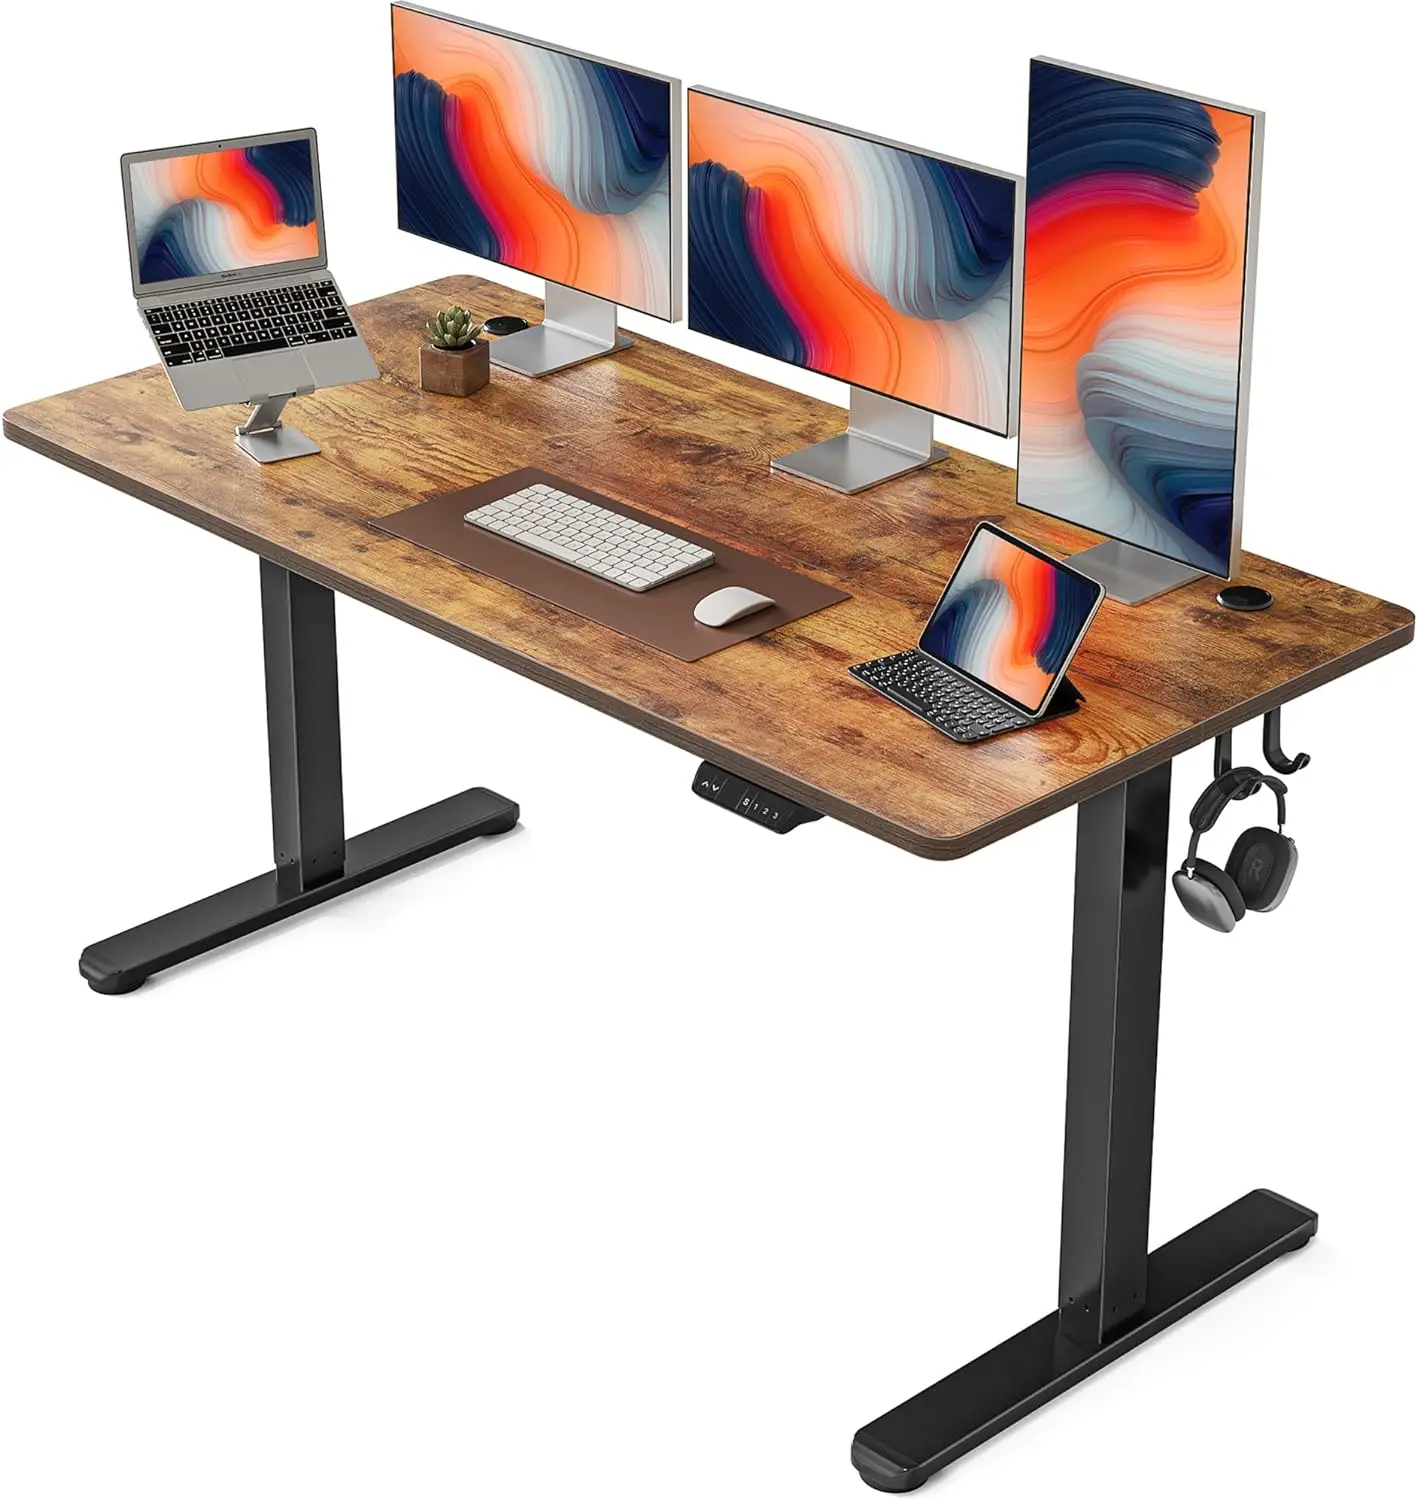 

FEZIBO Electric Standing , 63 x 24 Inches Height Adjustable Stand up Sit Stand Home Office , Computer Desk,